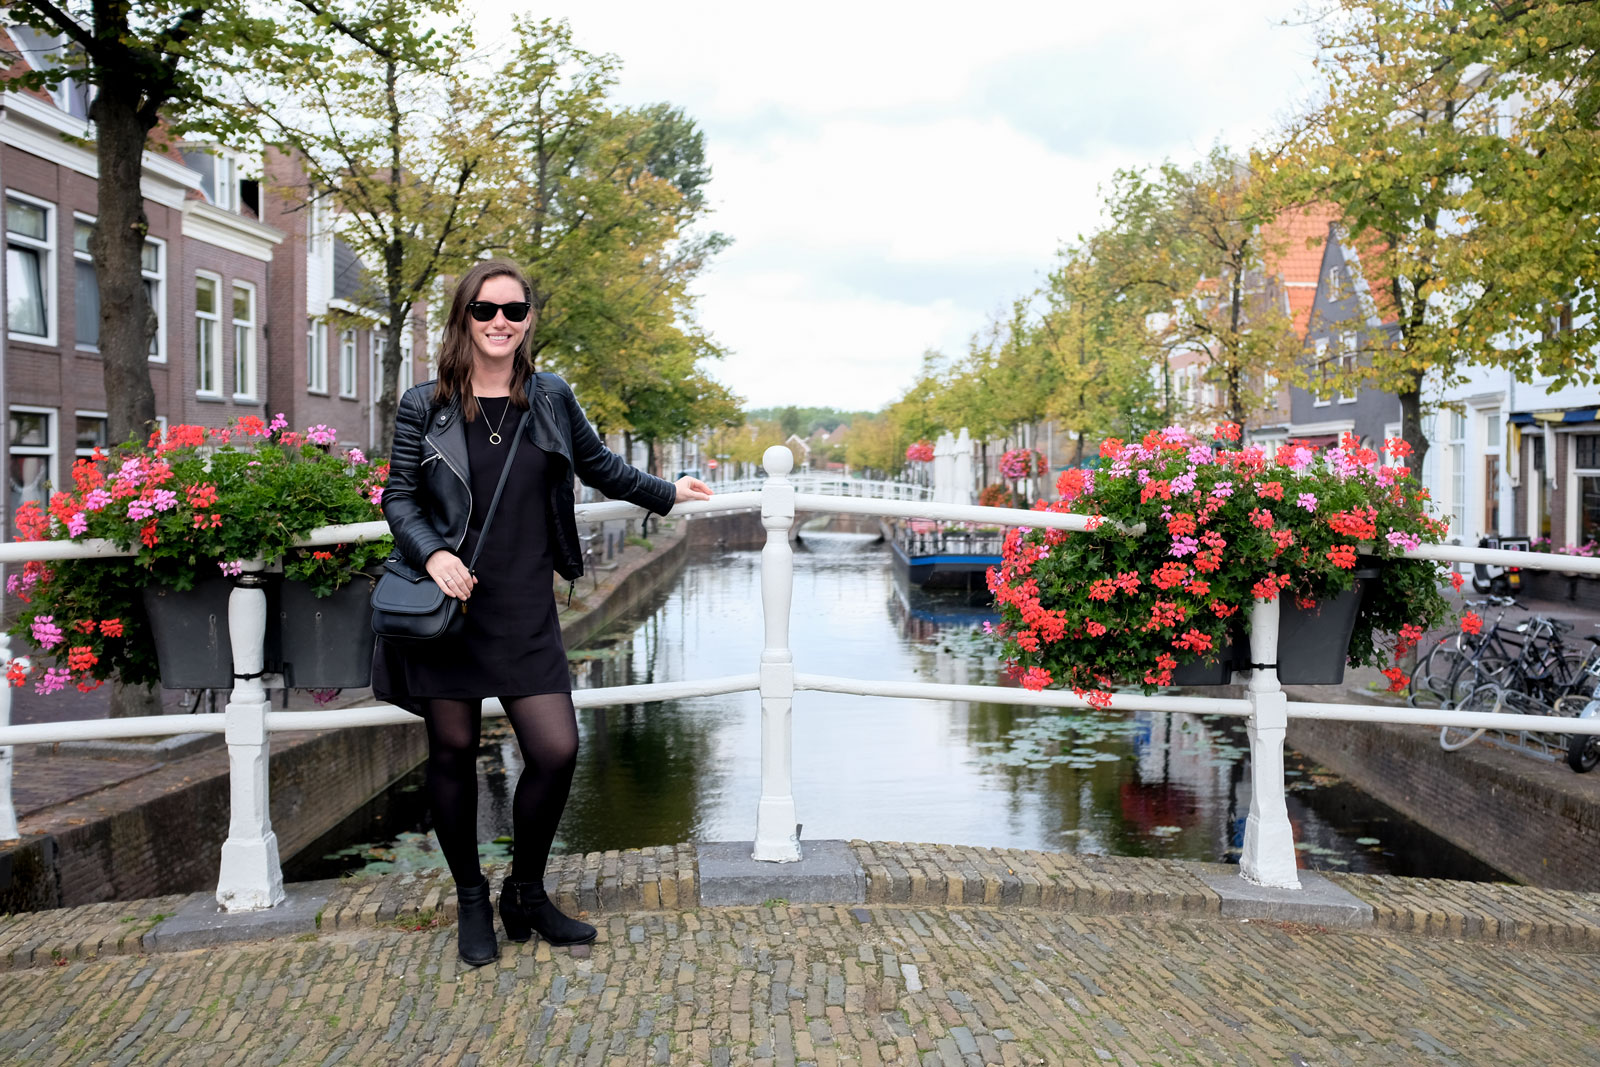 Alyssa stands in front of a canal in Delft